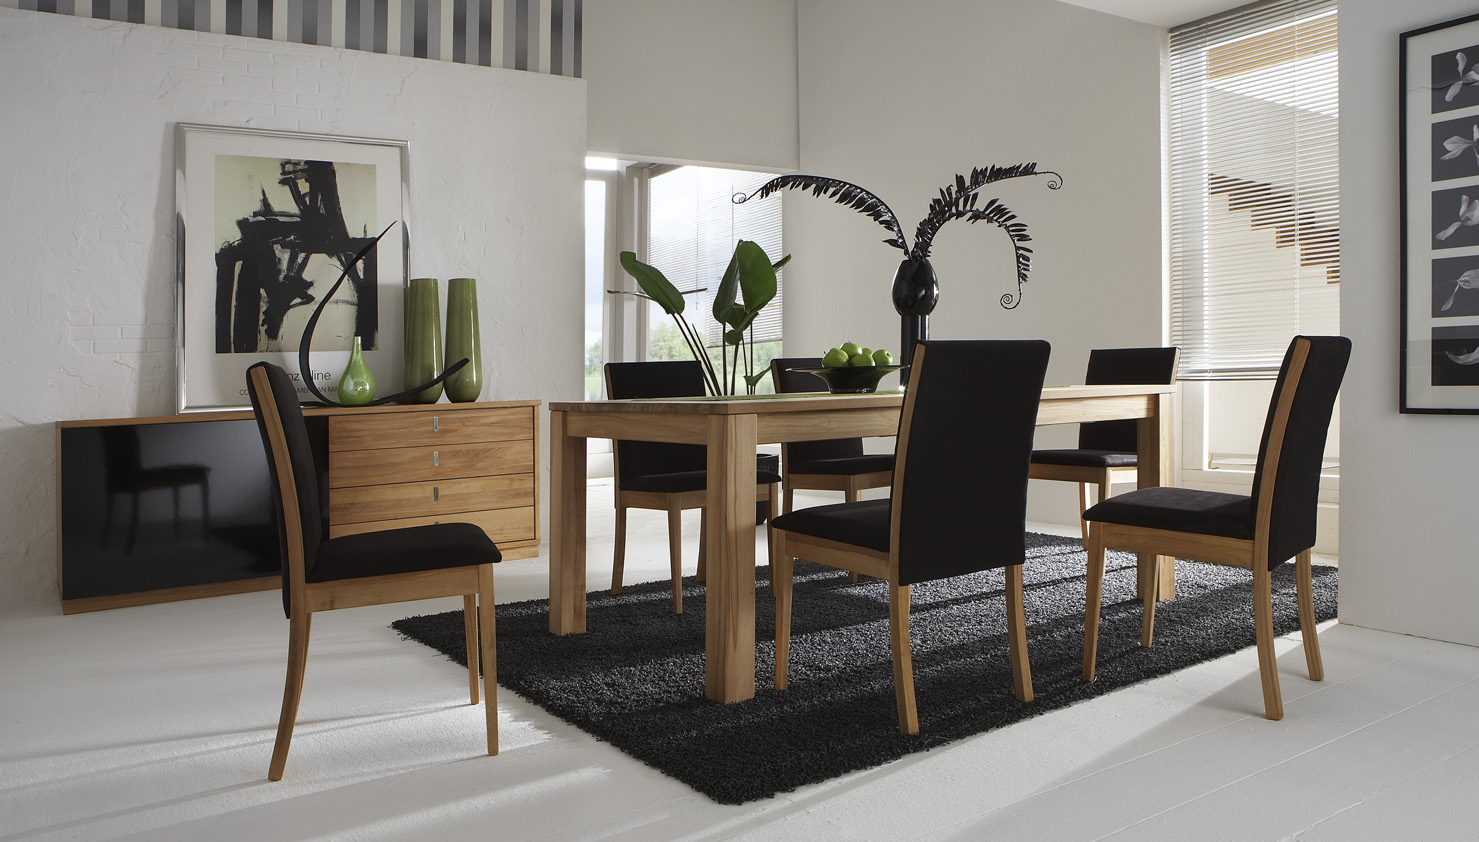 Shag Area Lovely Black Shag Area Rug Also Lovely Potted Plants Decor In Modern Dining Room Idea And Long Buffet Design Dining Room Modern Dining Room In Stylish And Artistic Design